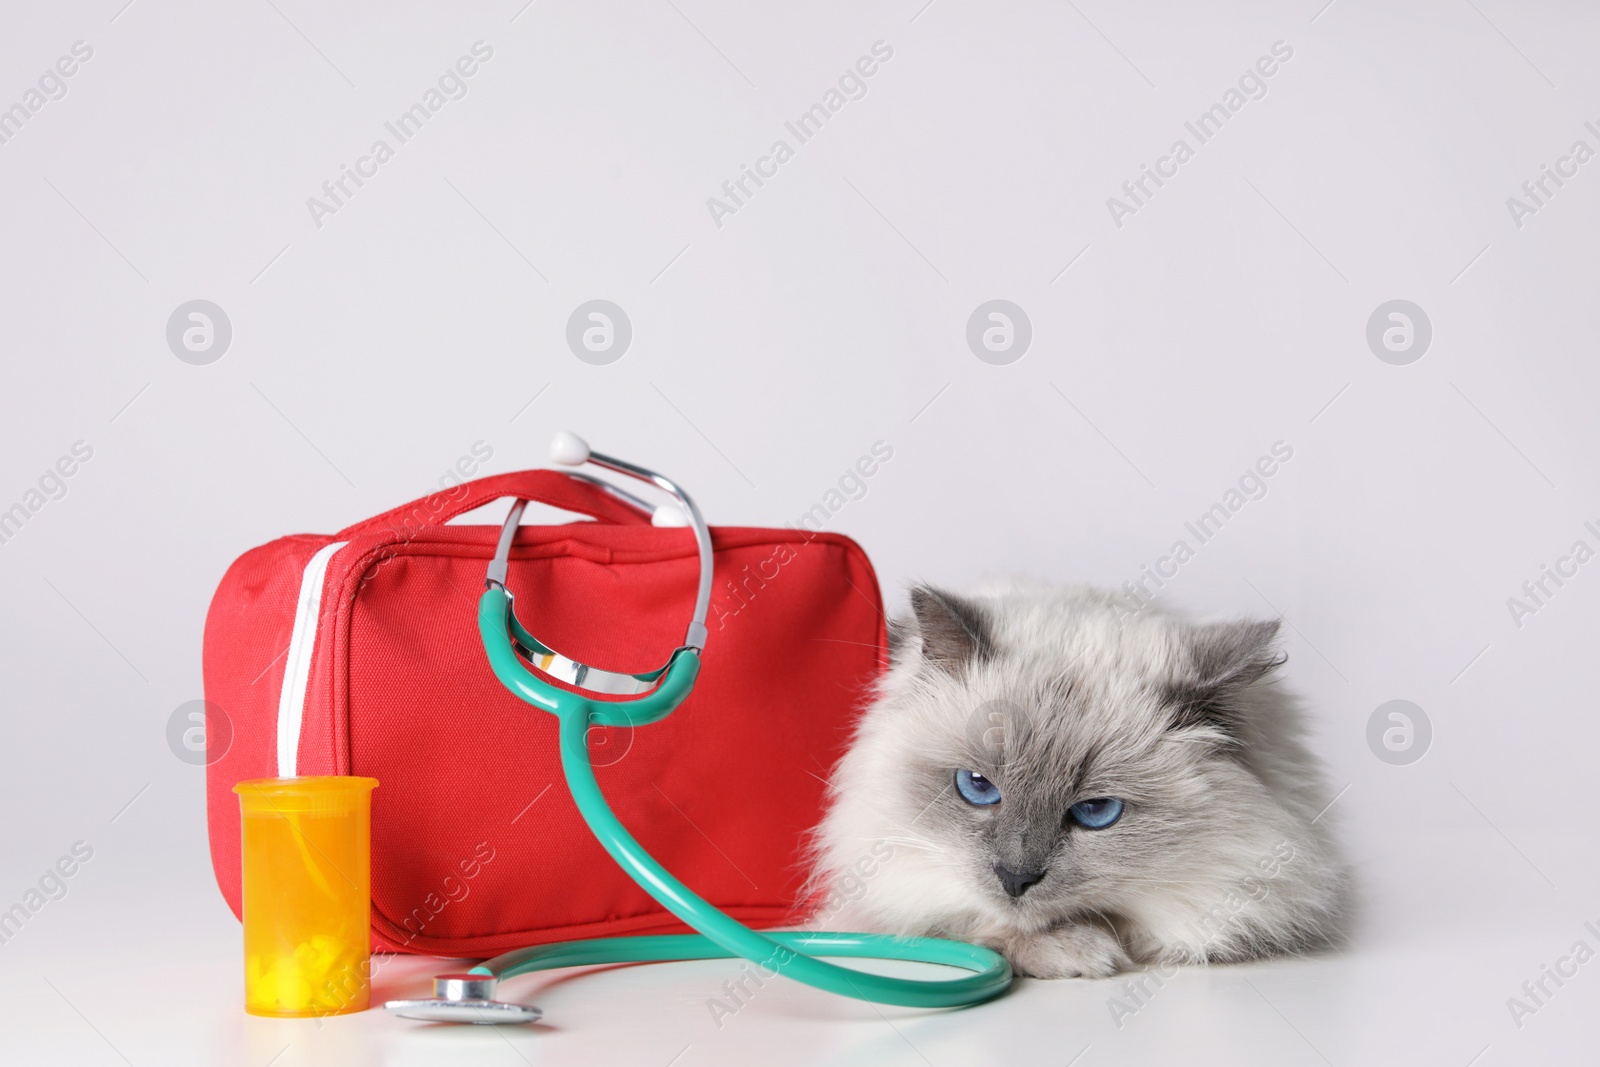 Photo of First aid kit and cute cat on light background. Animal care